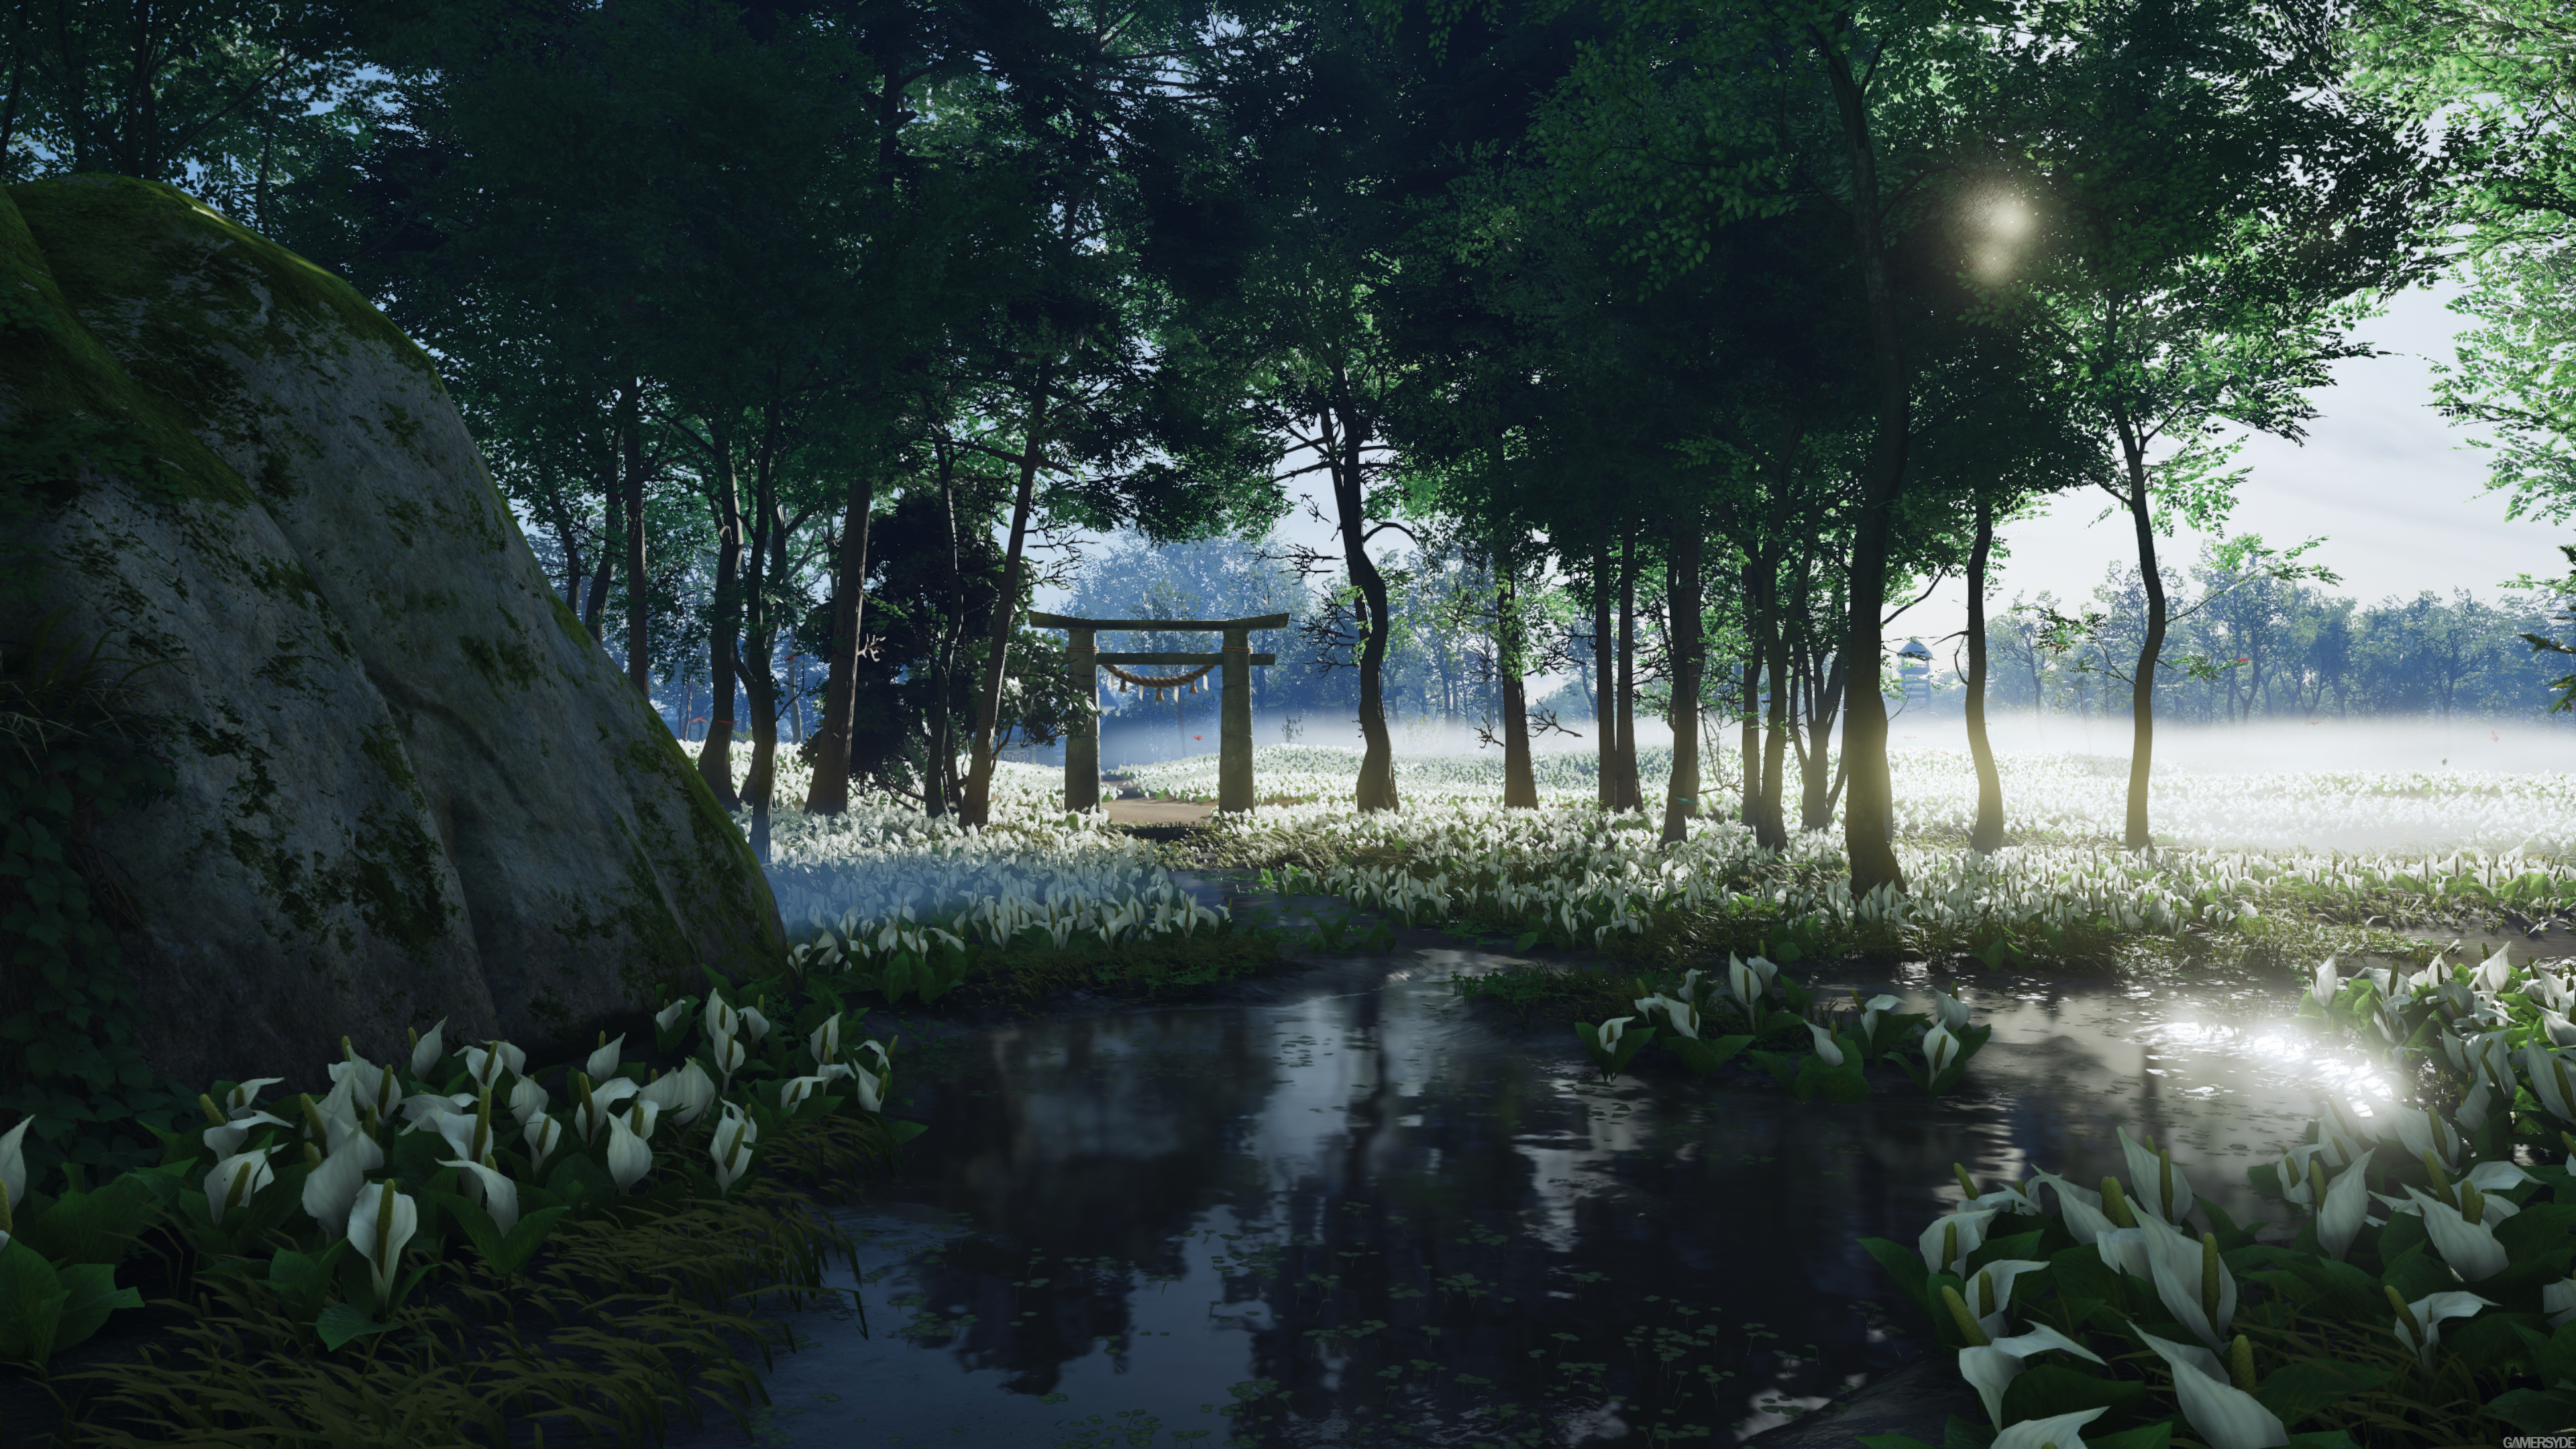 metacritic on X: Ghost of Tsushima [PS4 - 83]   #GhostsofTsushima Game Informer (9.5): This is a game that nails the  aesthetic it's shooting for, firmly establishing itself as the medium's  defining